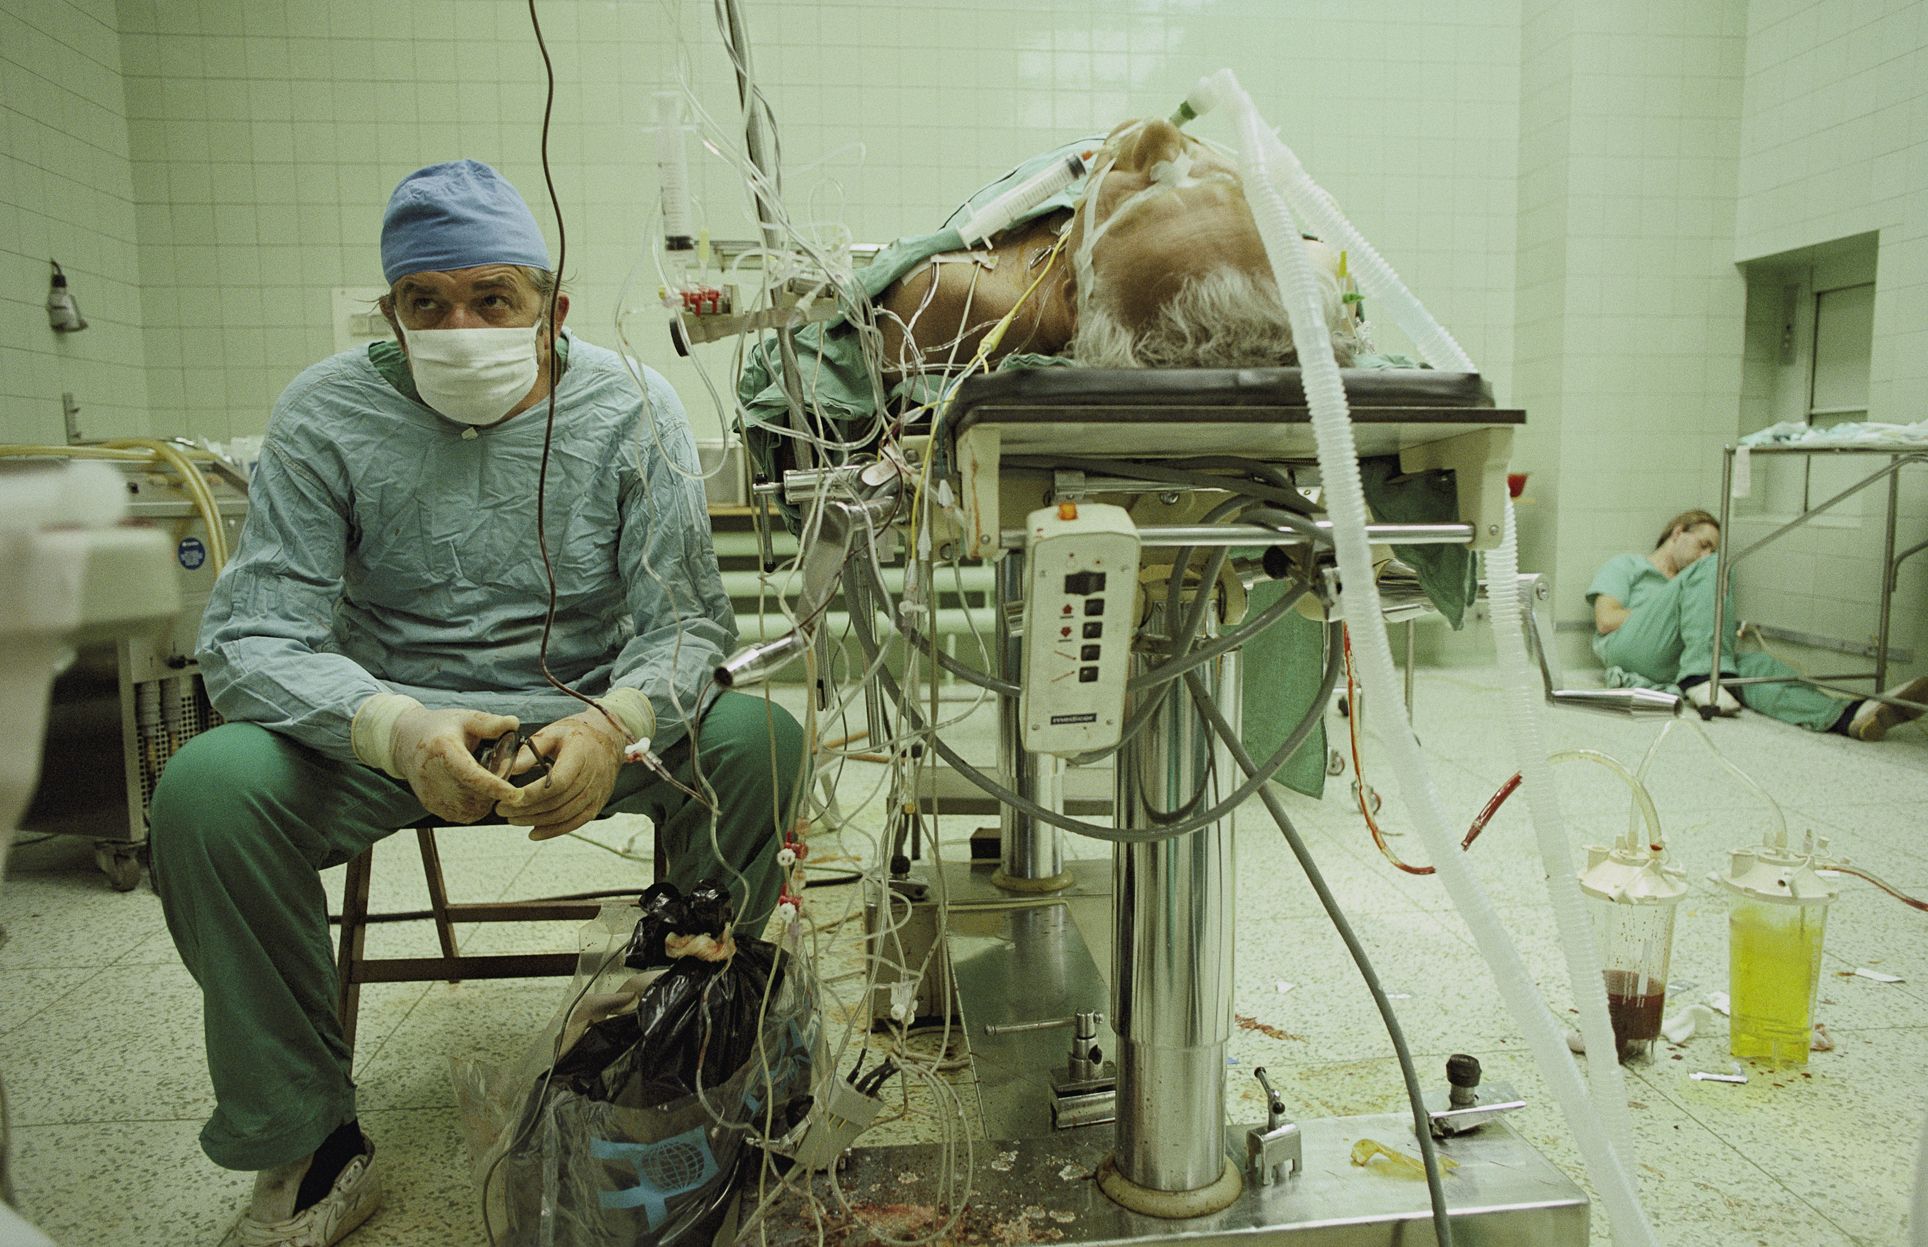 After a 23 hrs long heart surgery | Dr. Zbigniew Religa keeping watch on the vital signs of a patient | His assistant fell asleep in the corner.